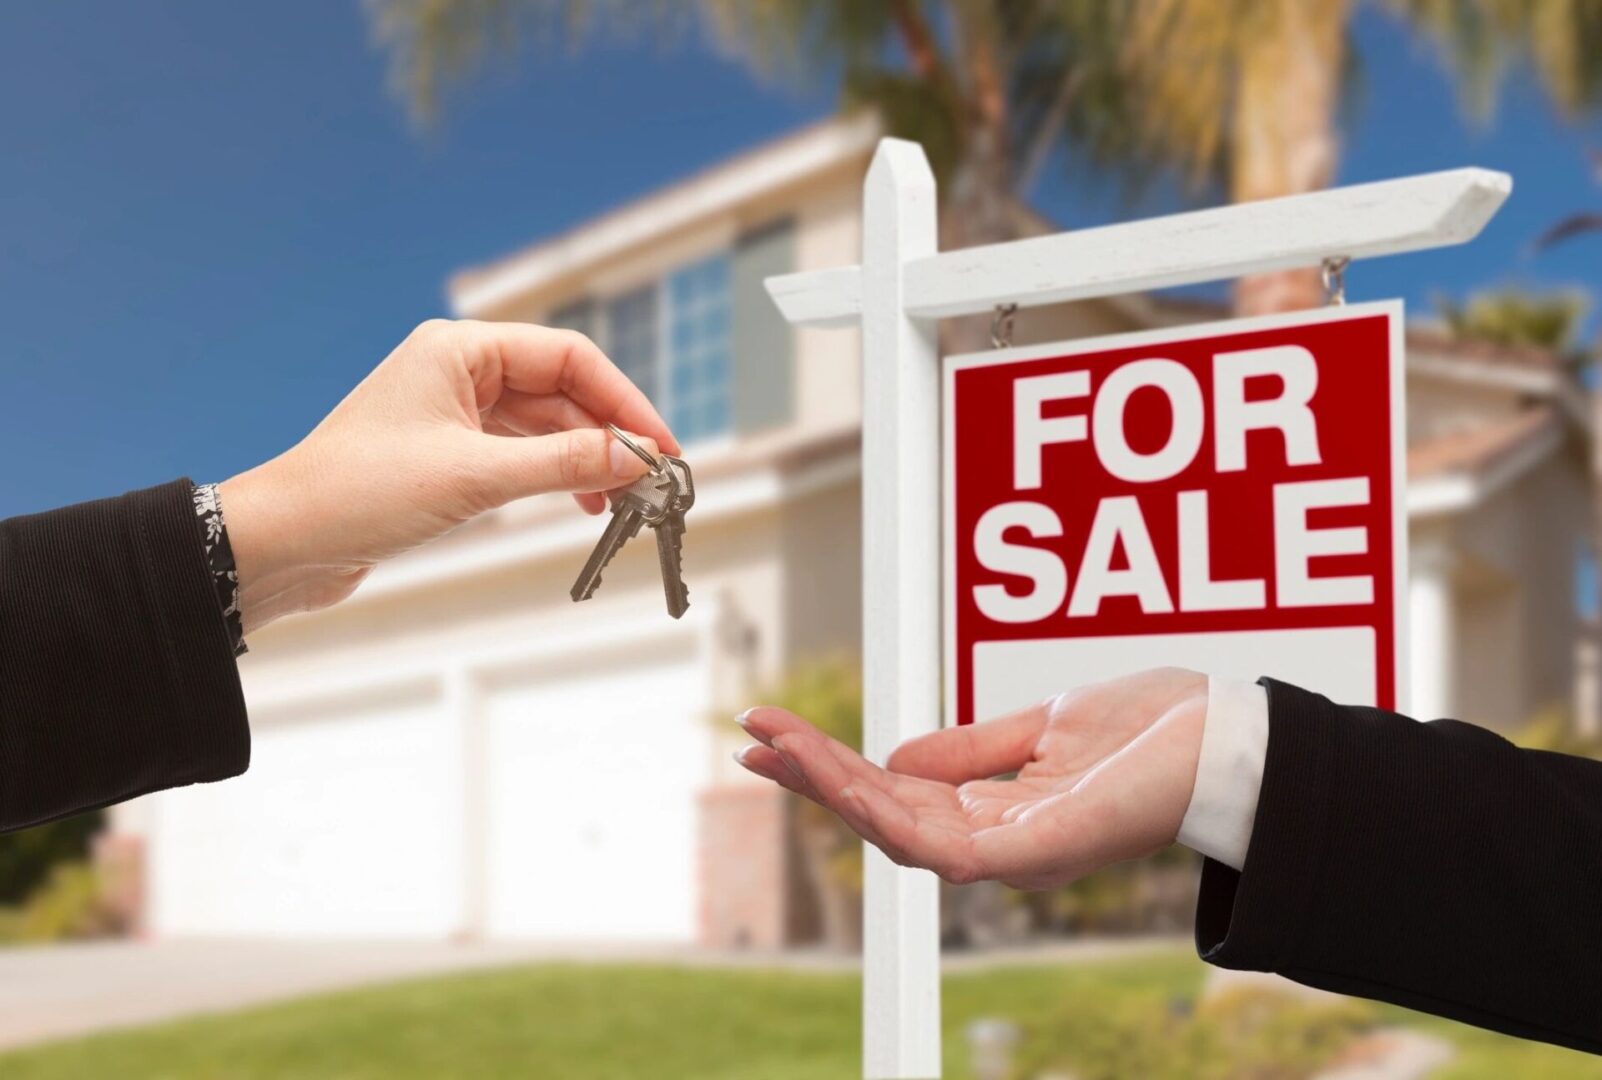 A Person Handing Keys in Front of a For Sale Board